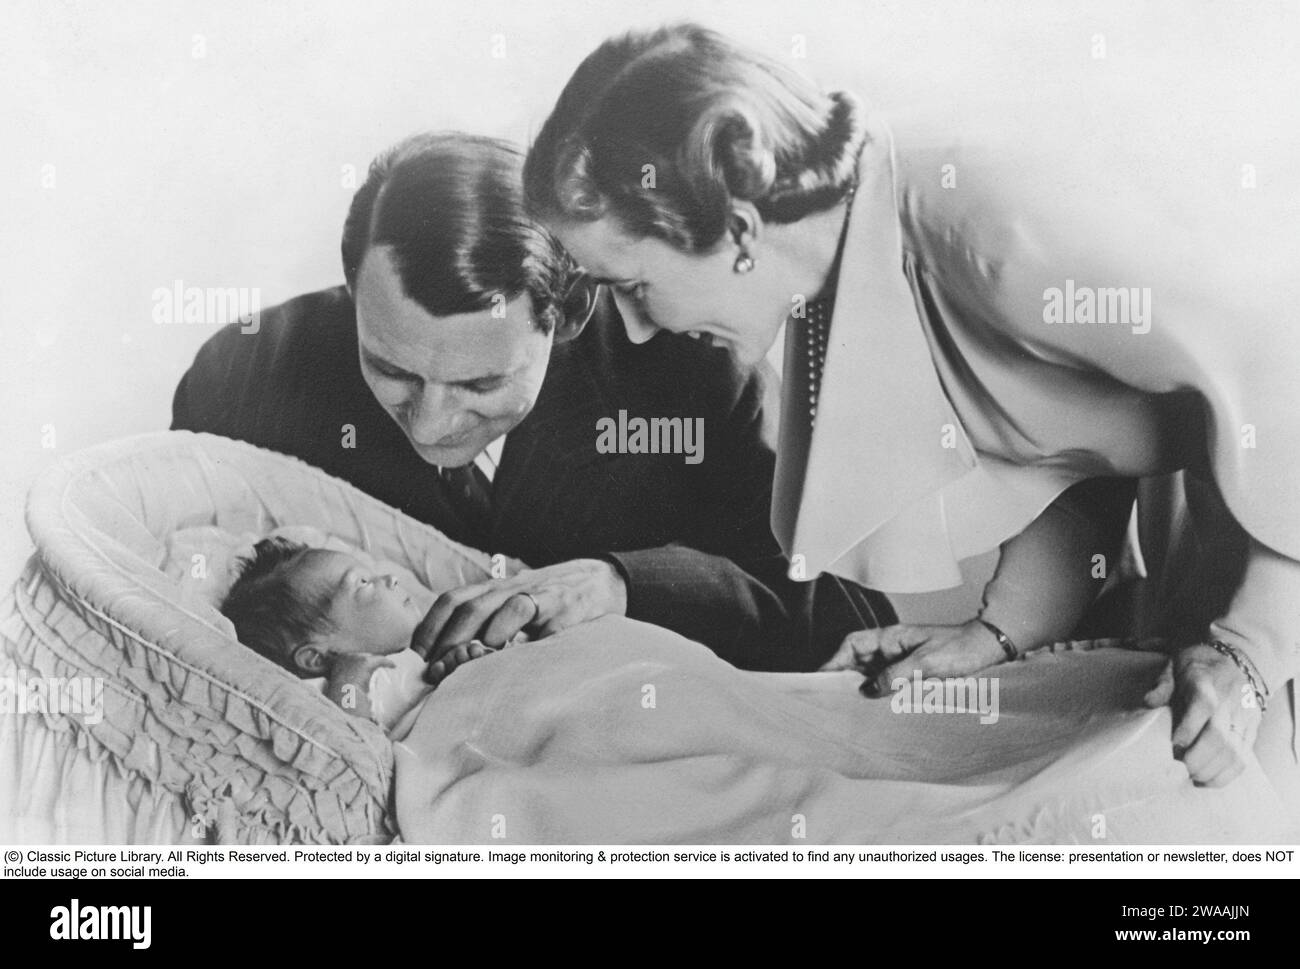 Queen Margrethe II of Denmark.  Pictured with her mother and father, Ingrid of Sweden and king Frederick IX of Denmark. 14 may 1940. Stock Photo